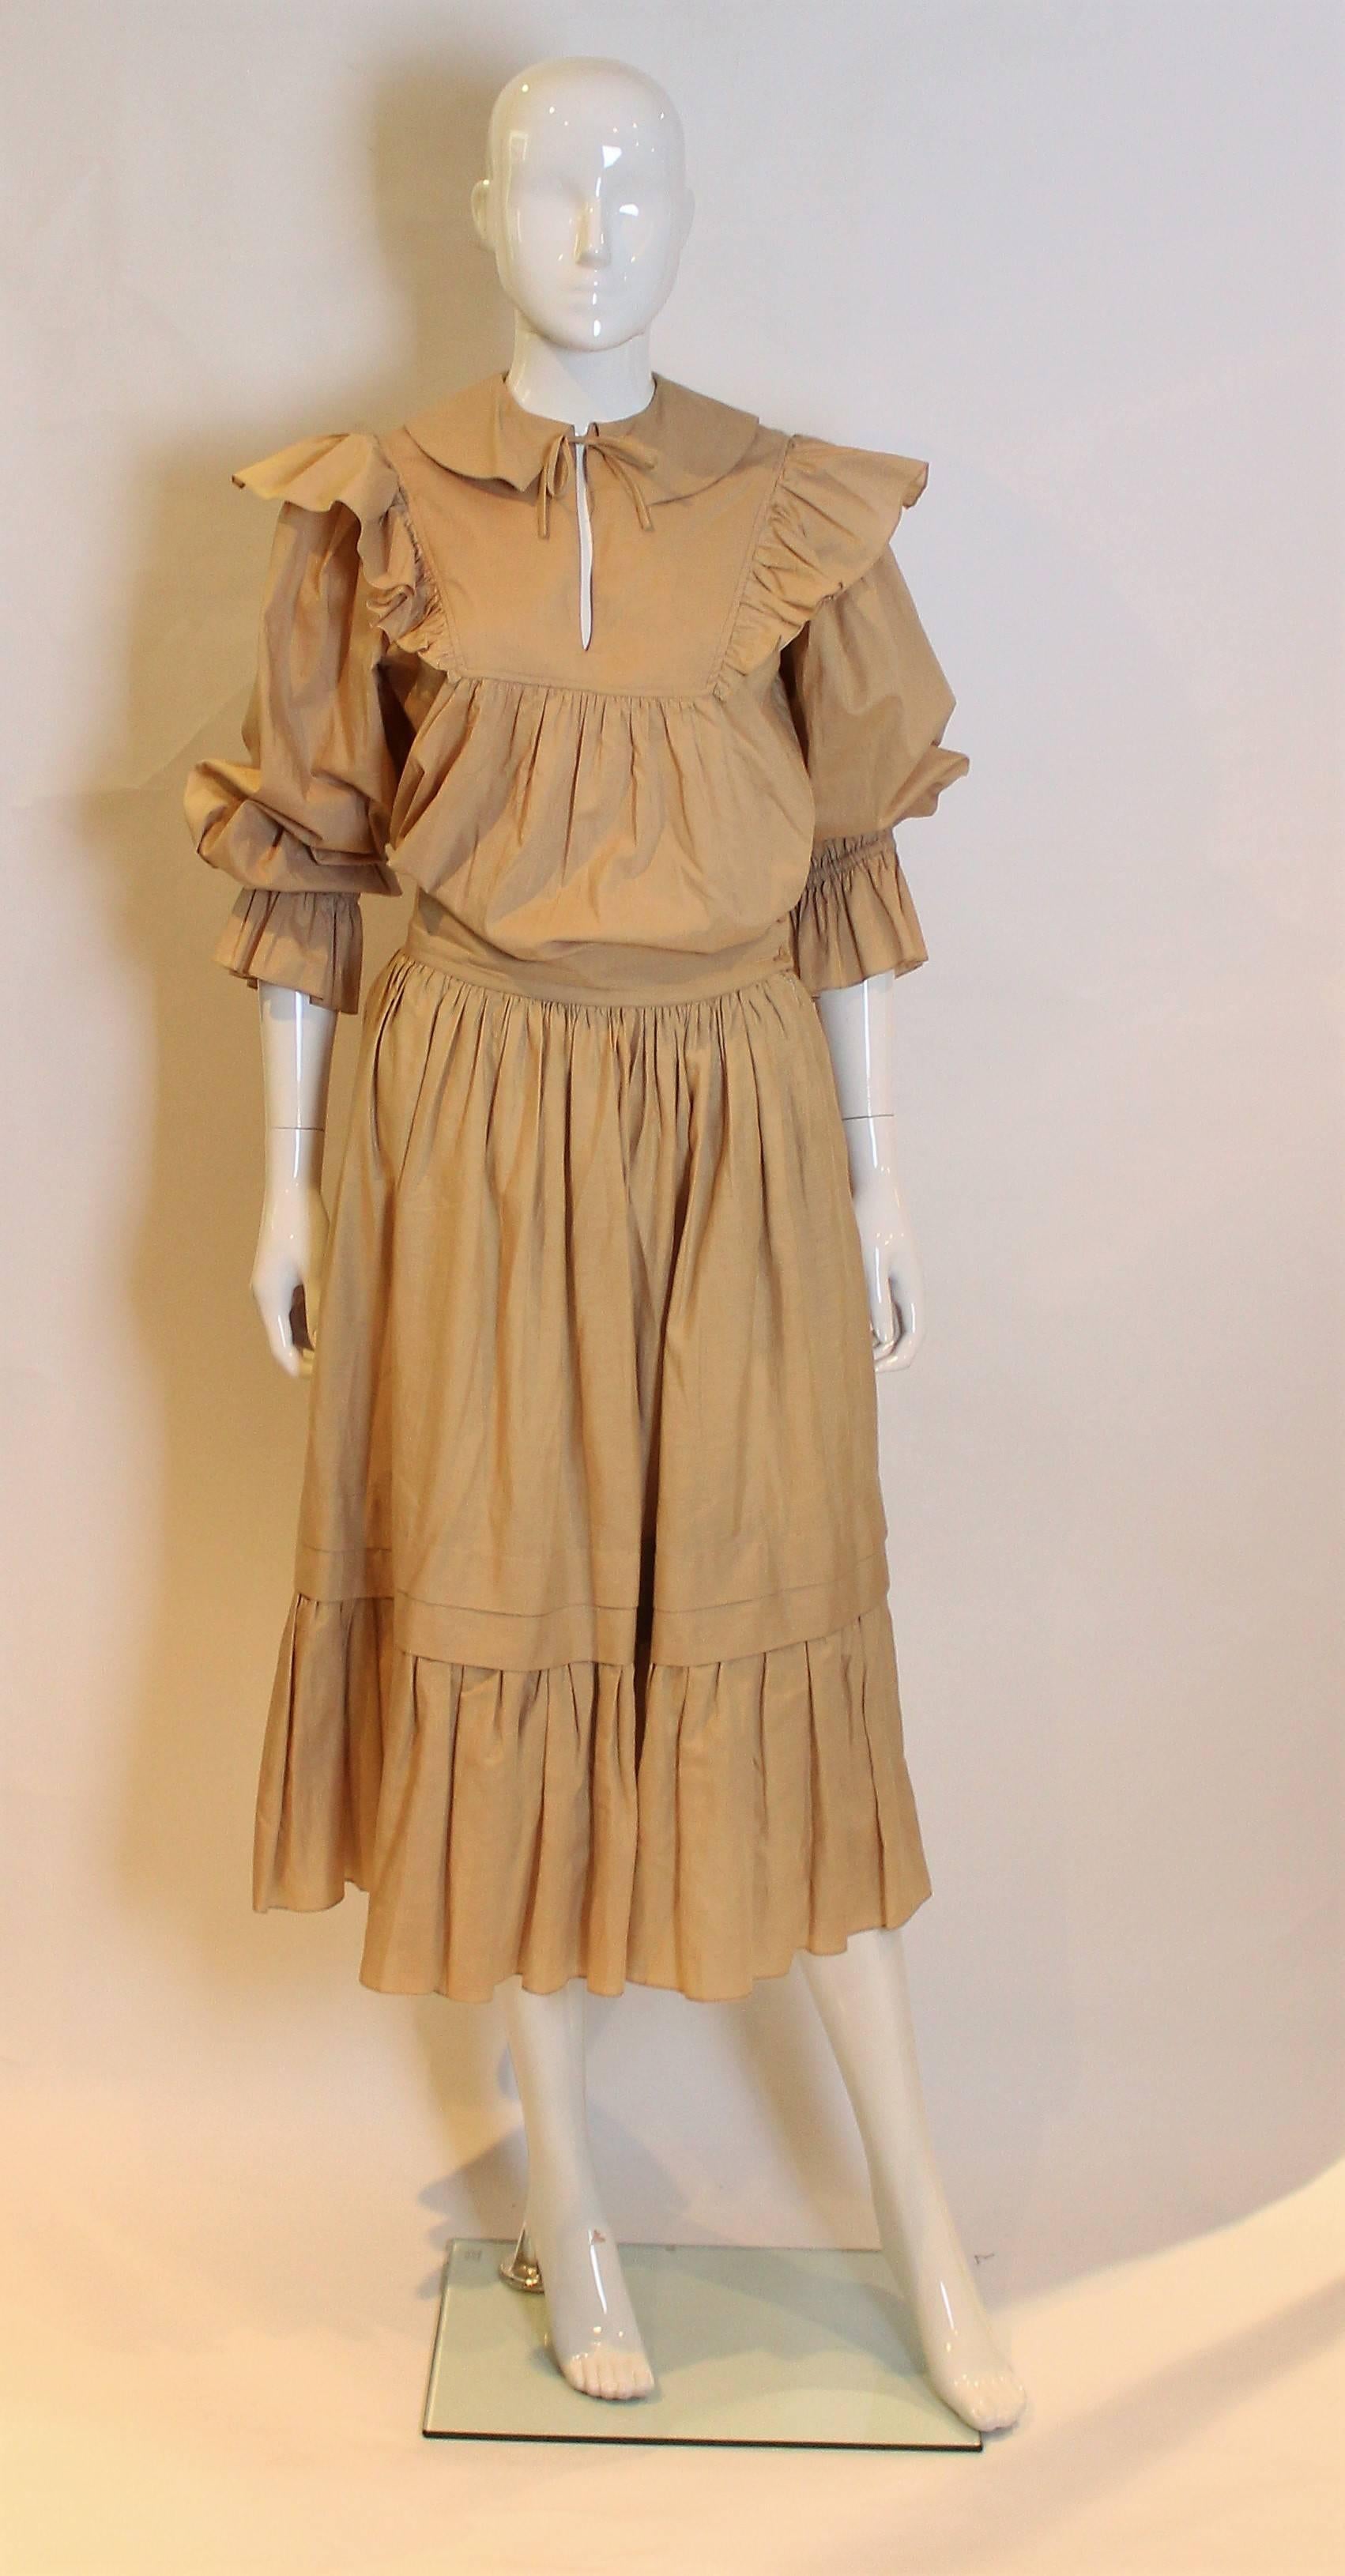  A great outfit by Christian Dior, Tricots et Coordinees.
The top is size 38, number 883, with a round collar, frills around the yoke and elbow length sleeves. The skirt is number 368 42420/32430 with a  wide waistband, pockets on either side, and 2